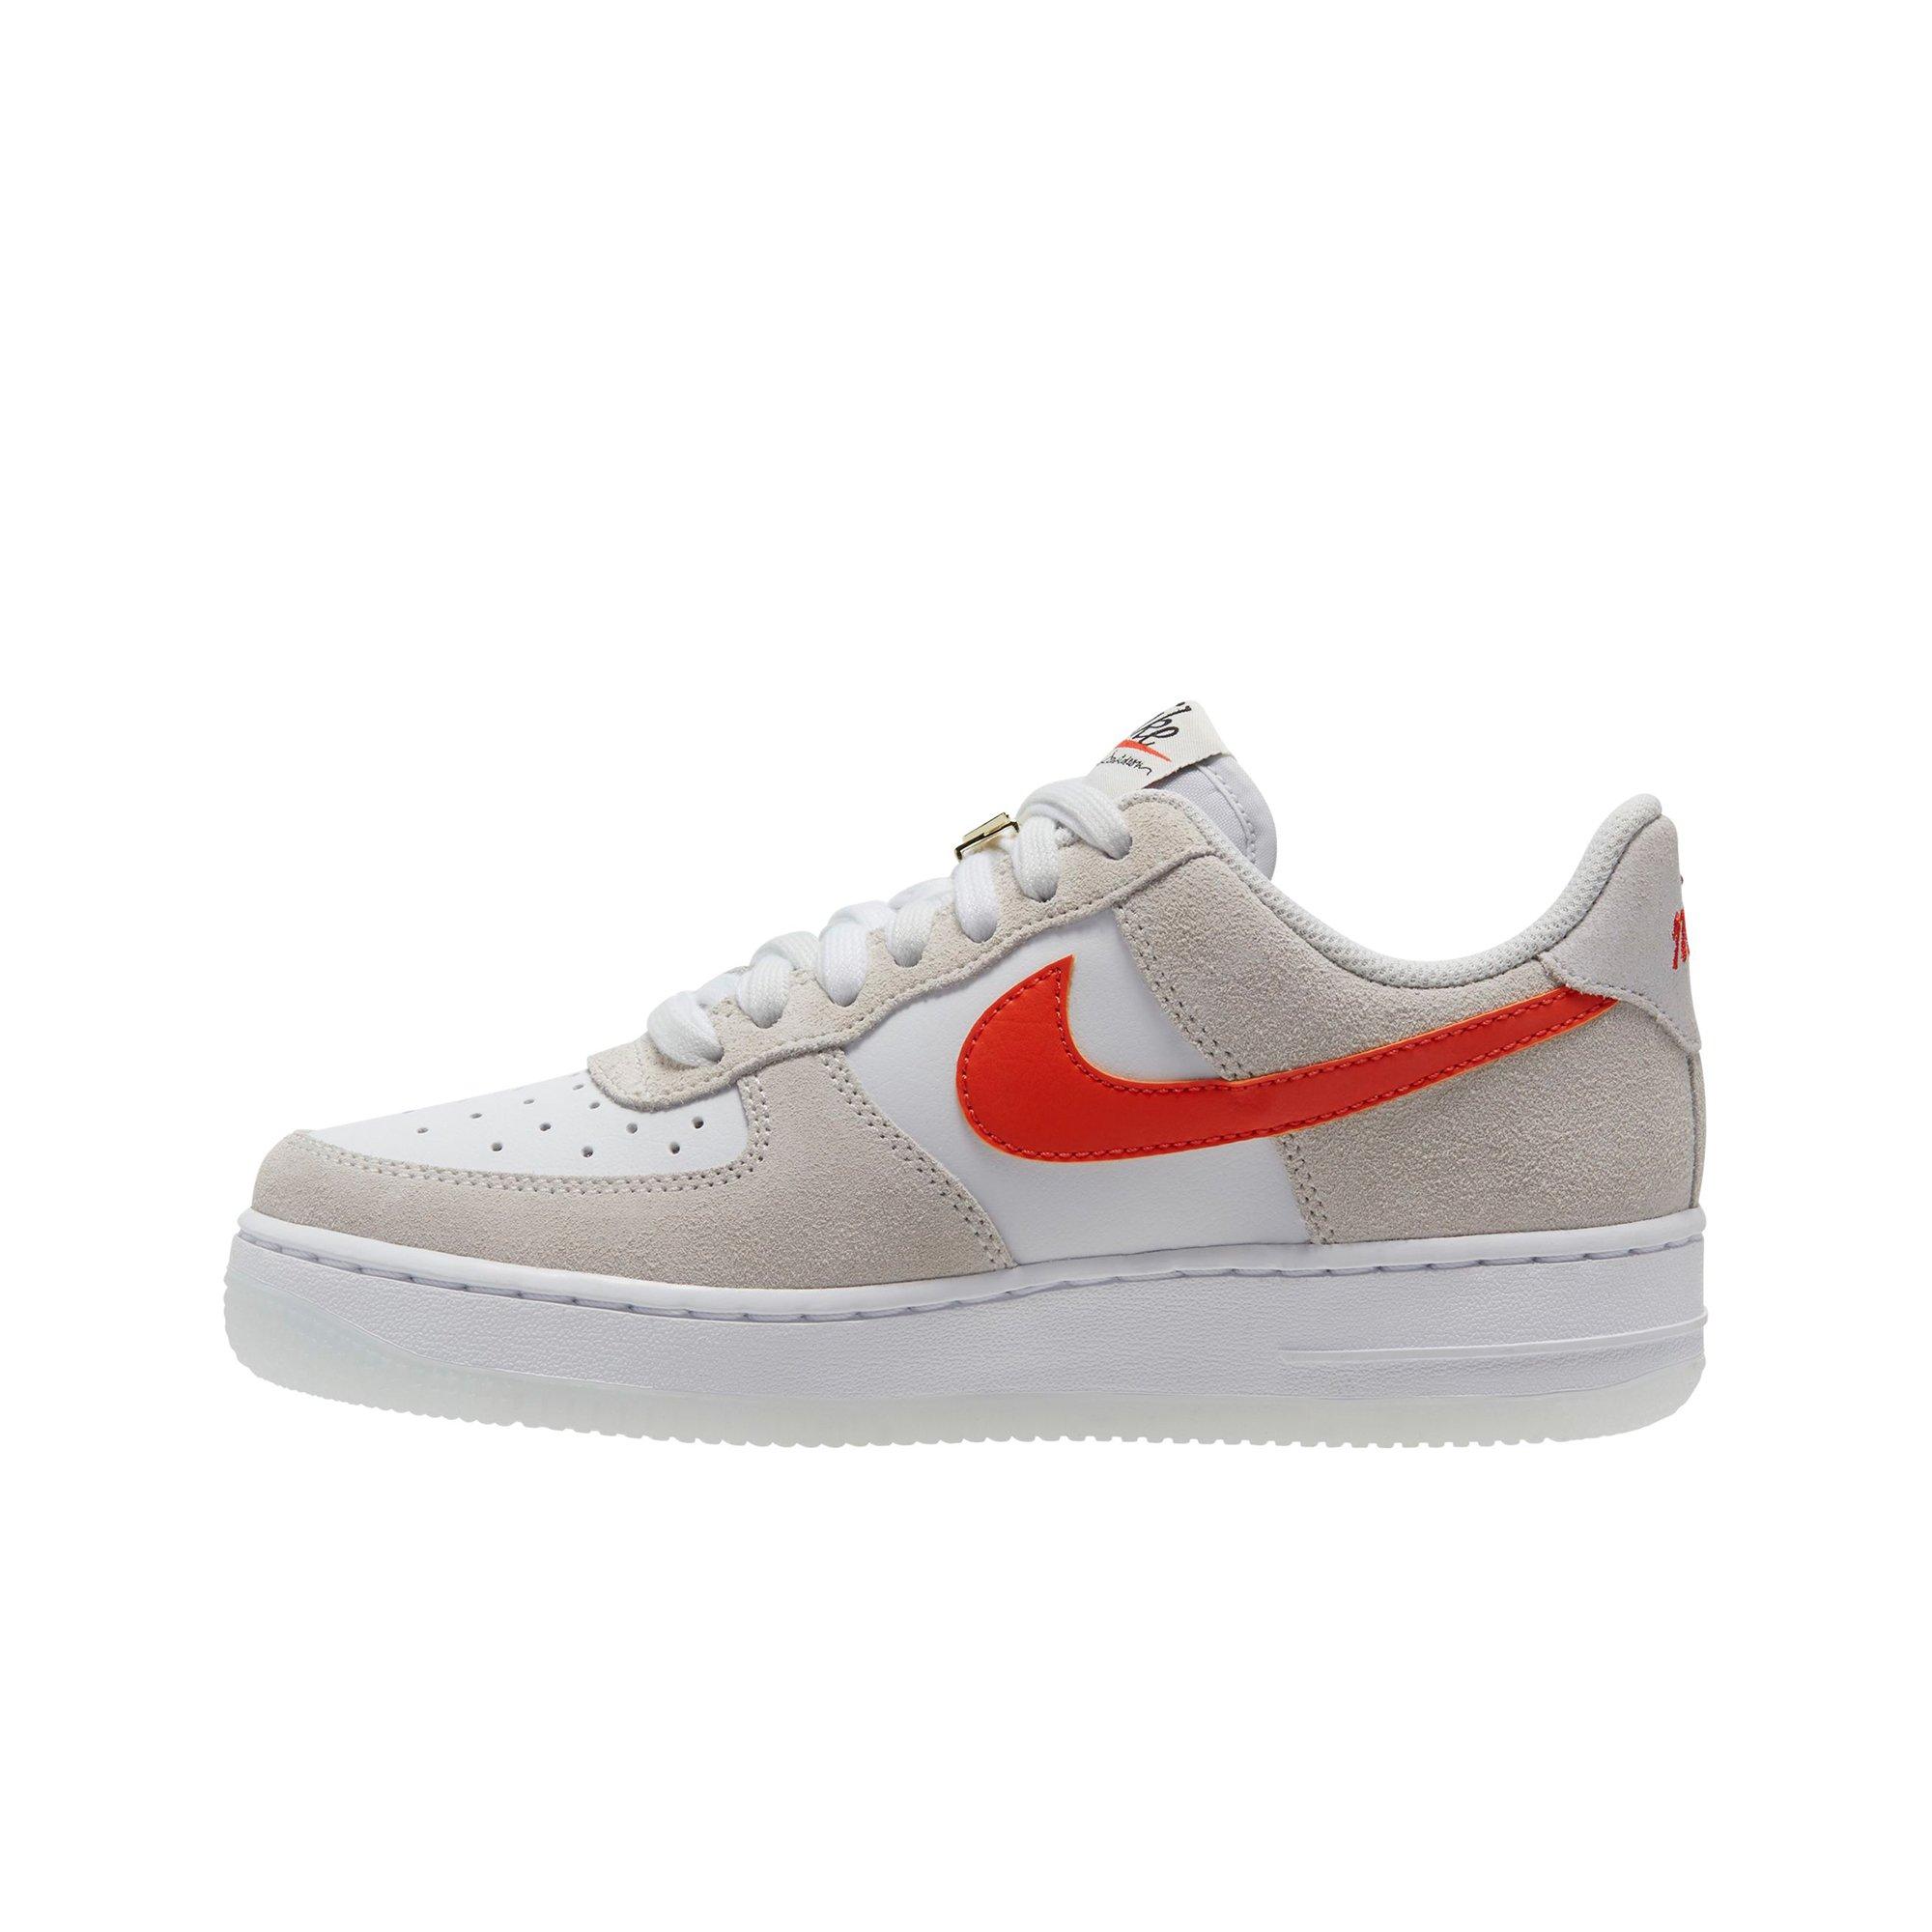 Nike Air Force 1 '07 Se first Use Sneakers In White